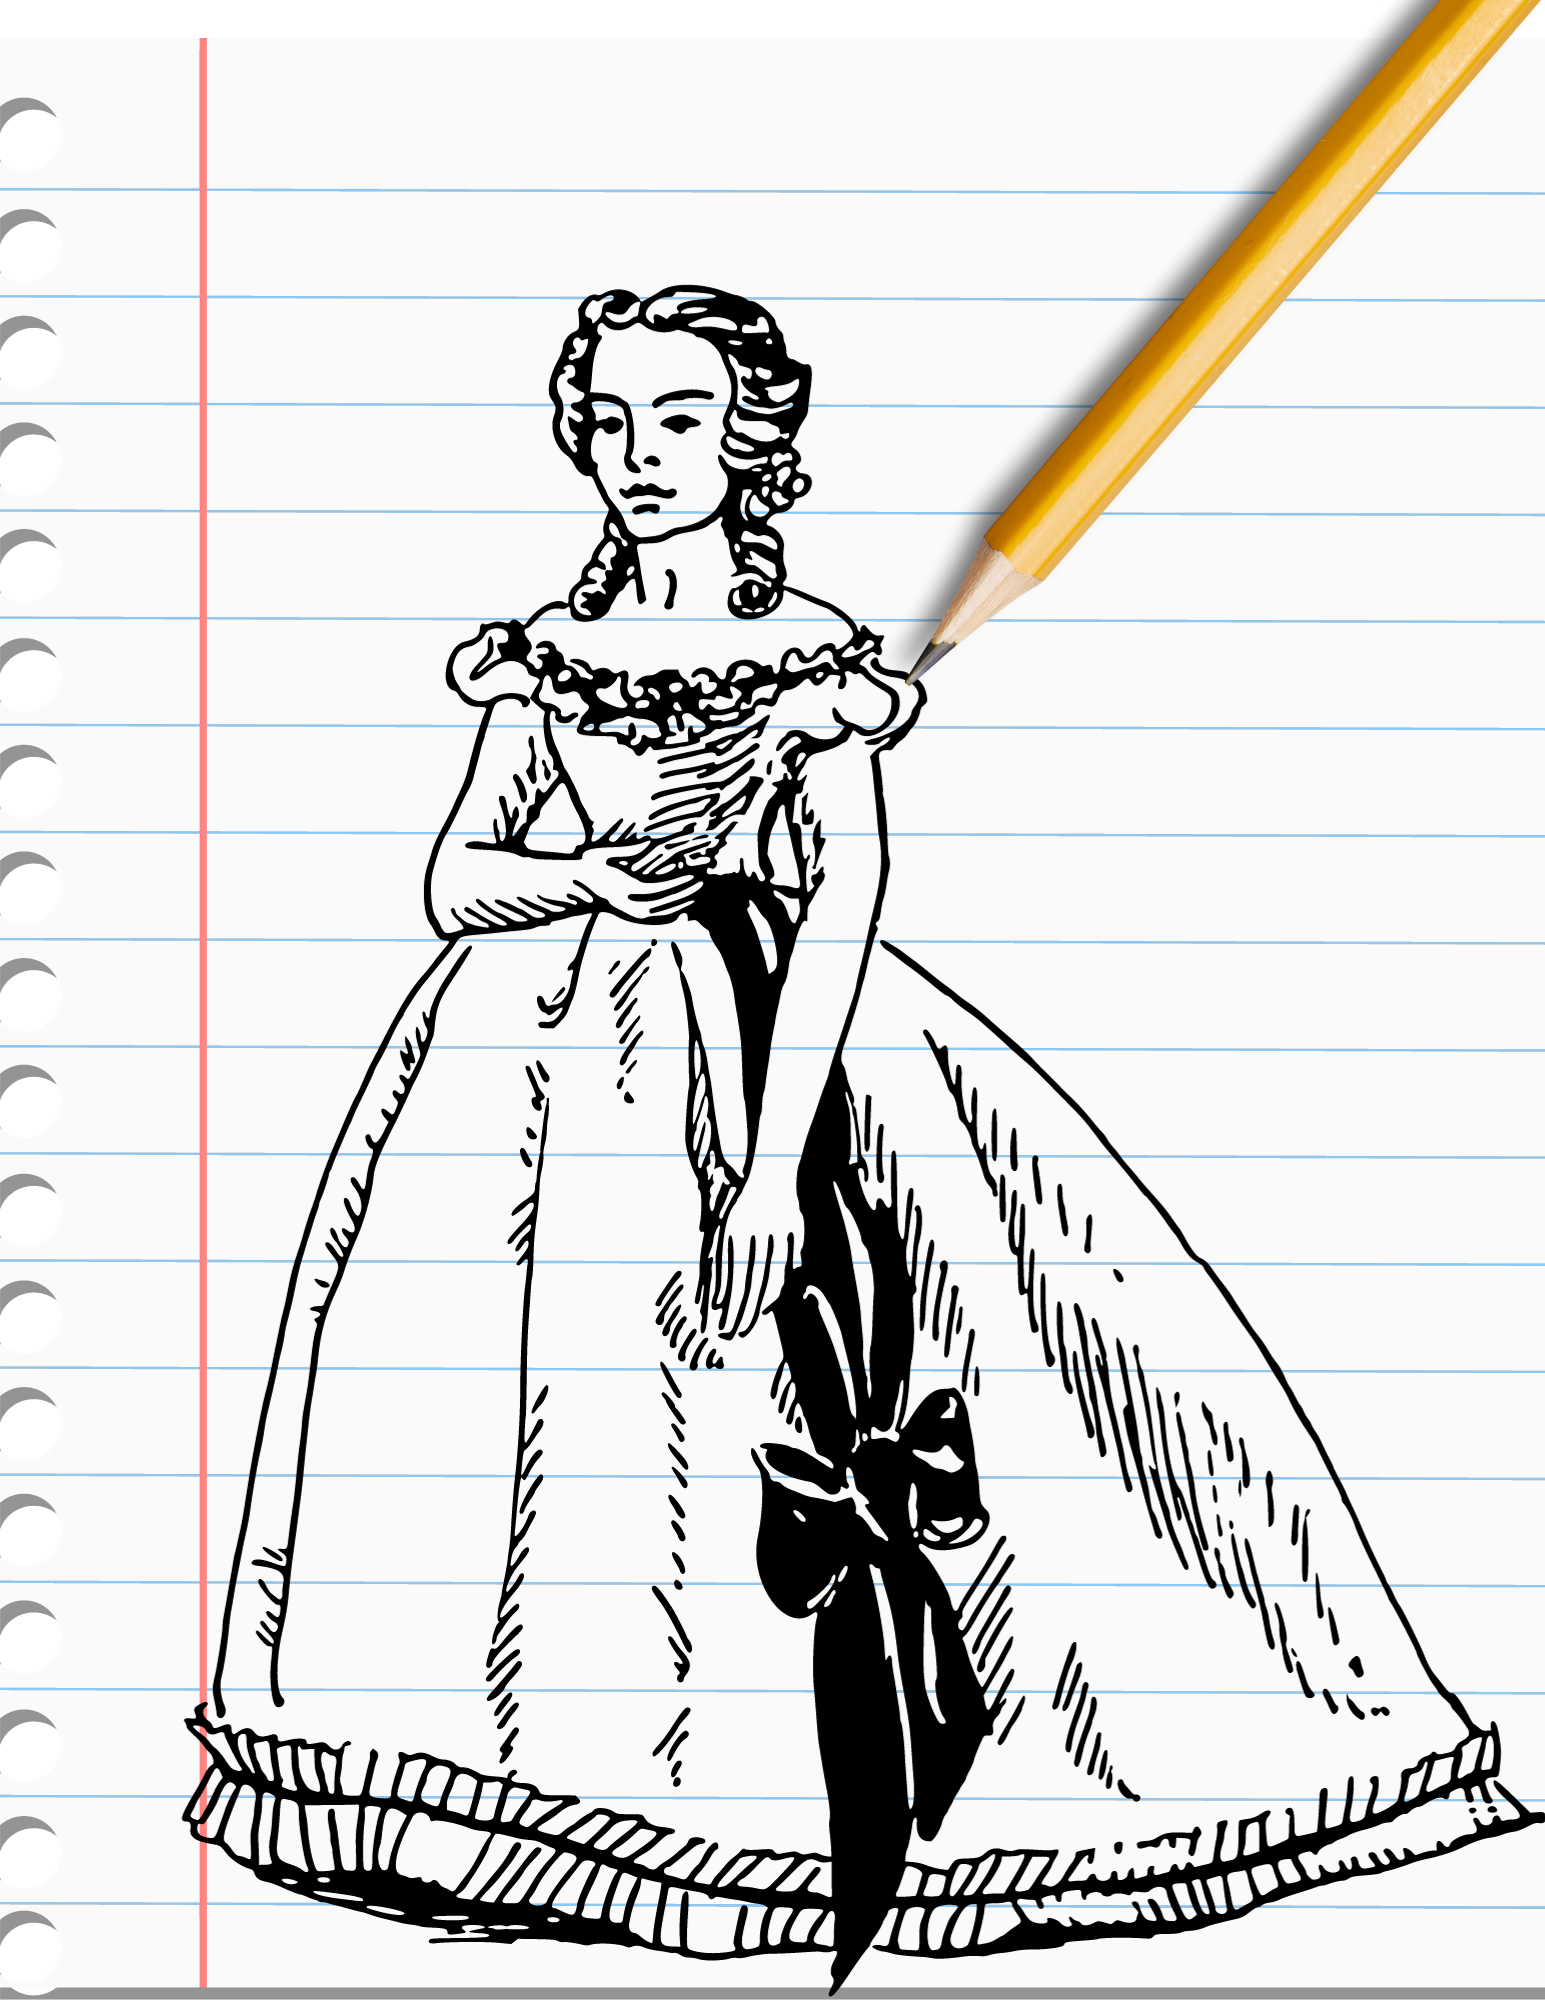 Costumed Model Drawing (Classic Literature-themed)